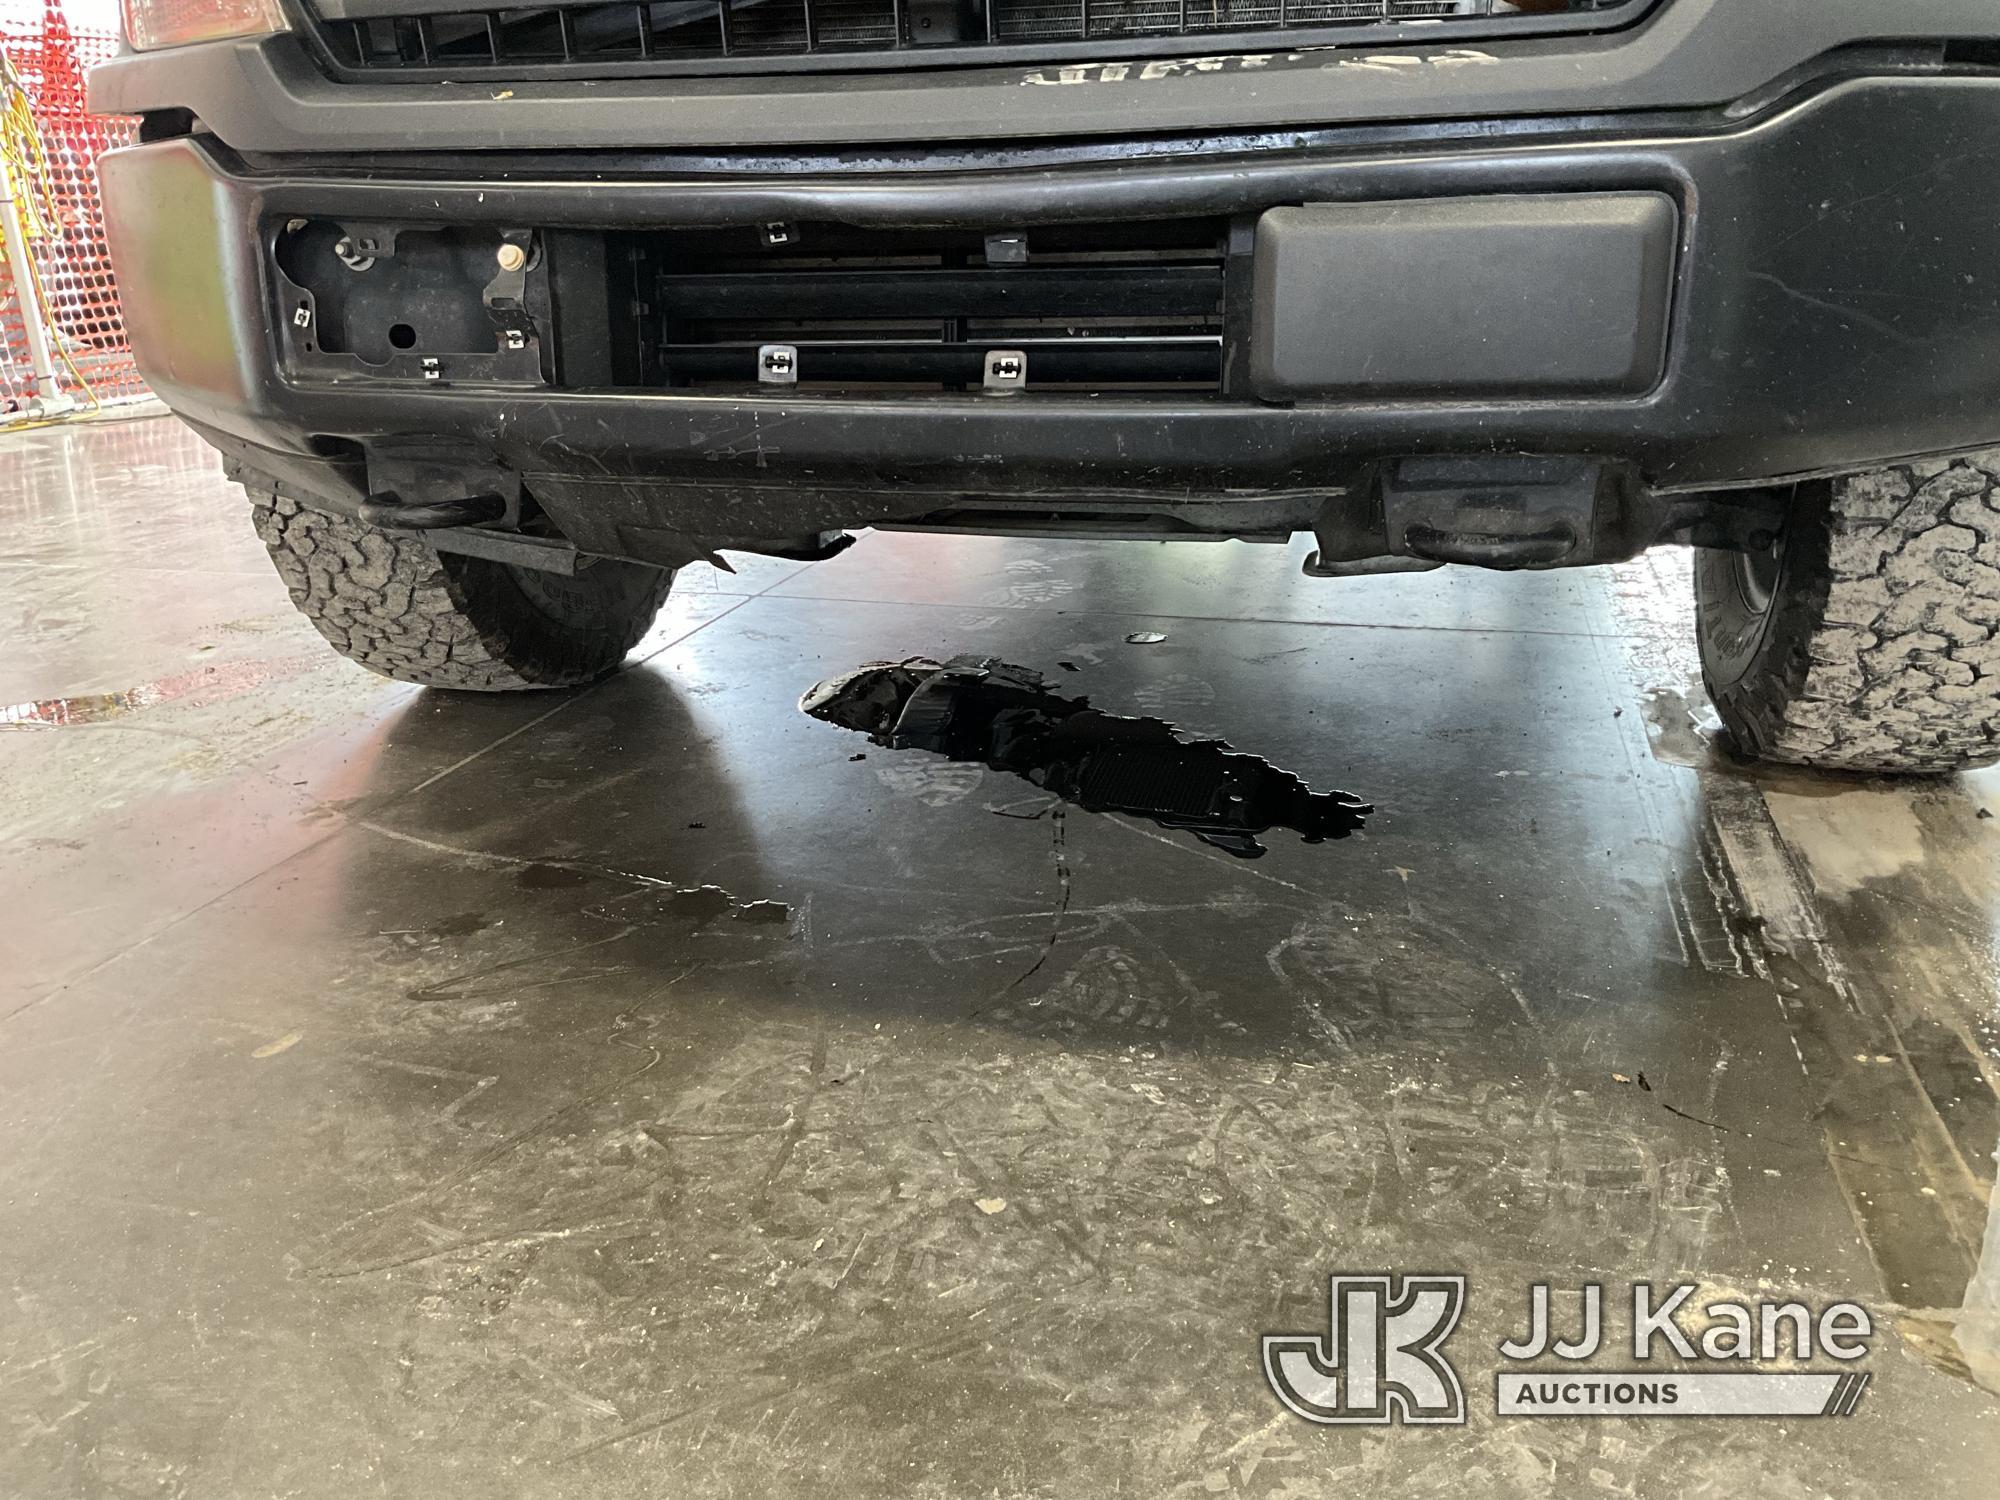 (Elizabethtown, KY) 2020 Ford F150 4x4 Crew-Cab Pickup Truck Runs) (Does Not Move, Check Engine Ligh